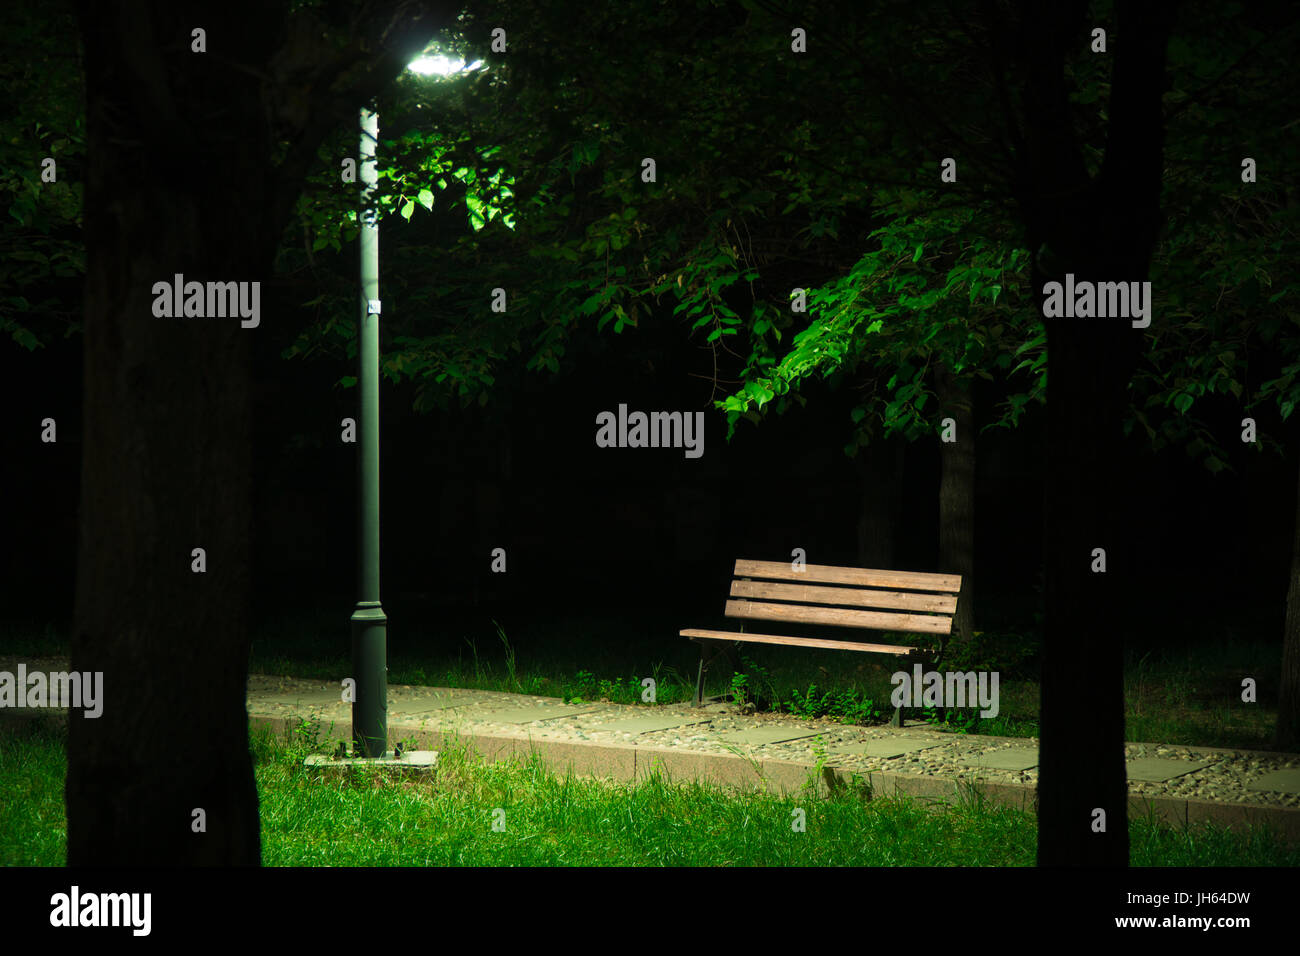 The light from a lamppost shinning onto a wooden bench and the surrounding grass with two trees as silhouettes at night. Stock Photo